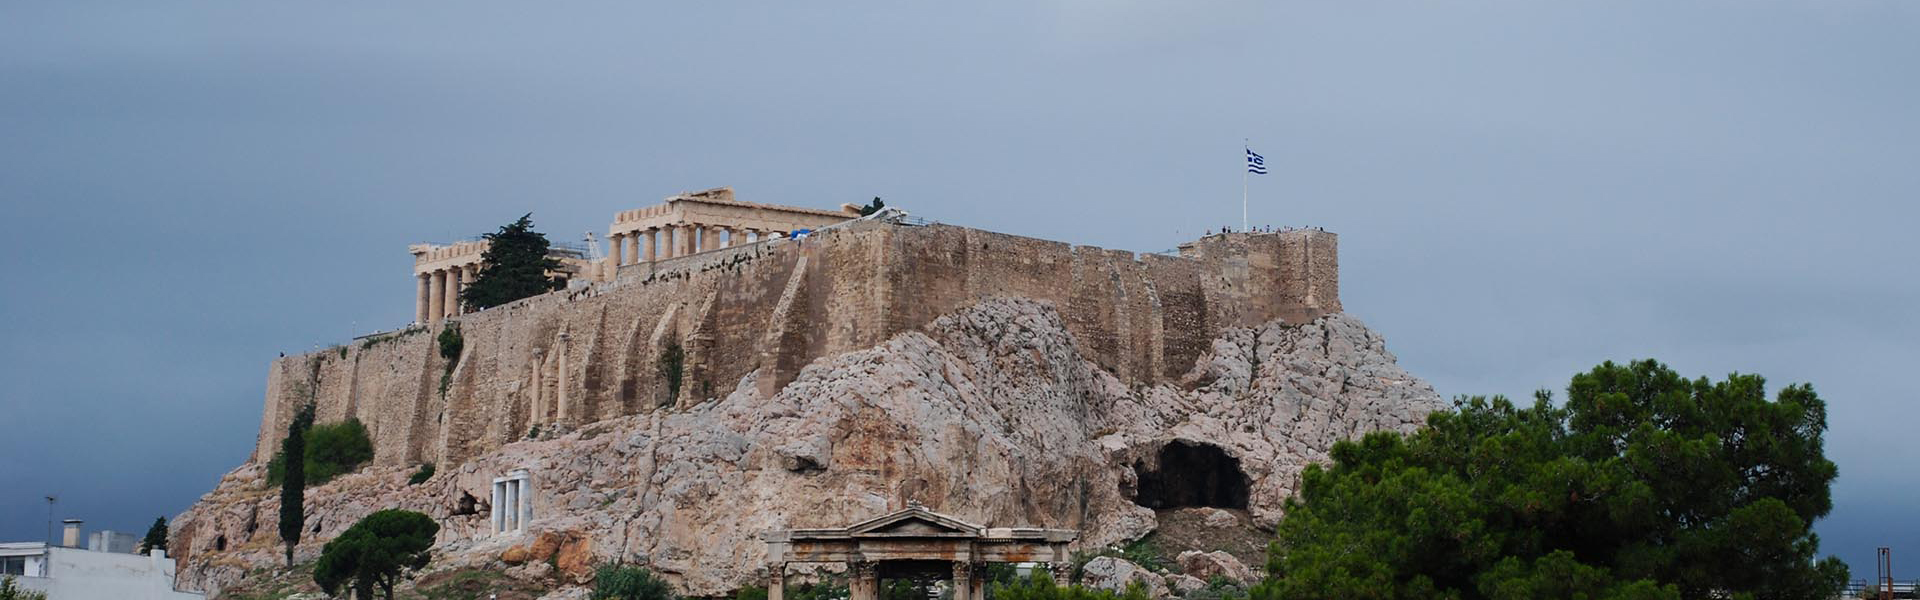 pid000212_Greece_Athens_2018_07_Acropolis-as-Seen-From-Temple-of-Zeus-Banner-Page-1920x600